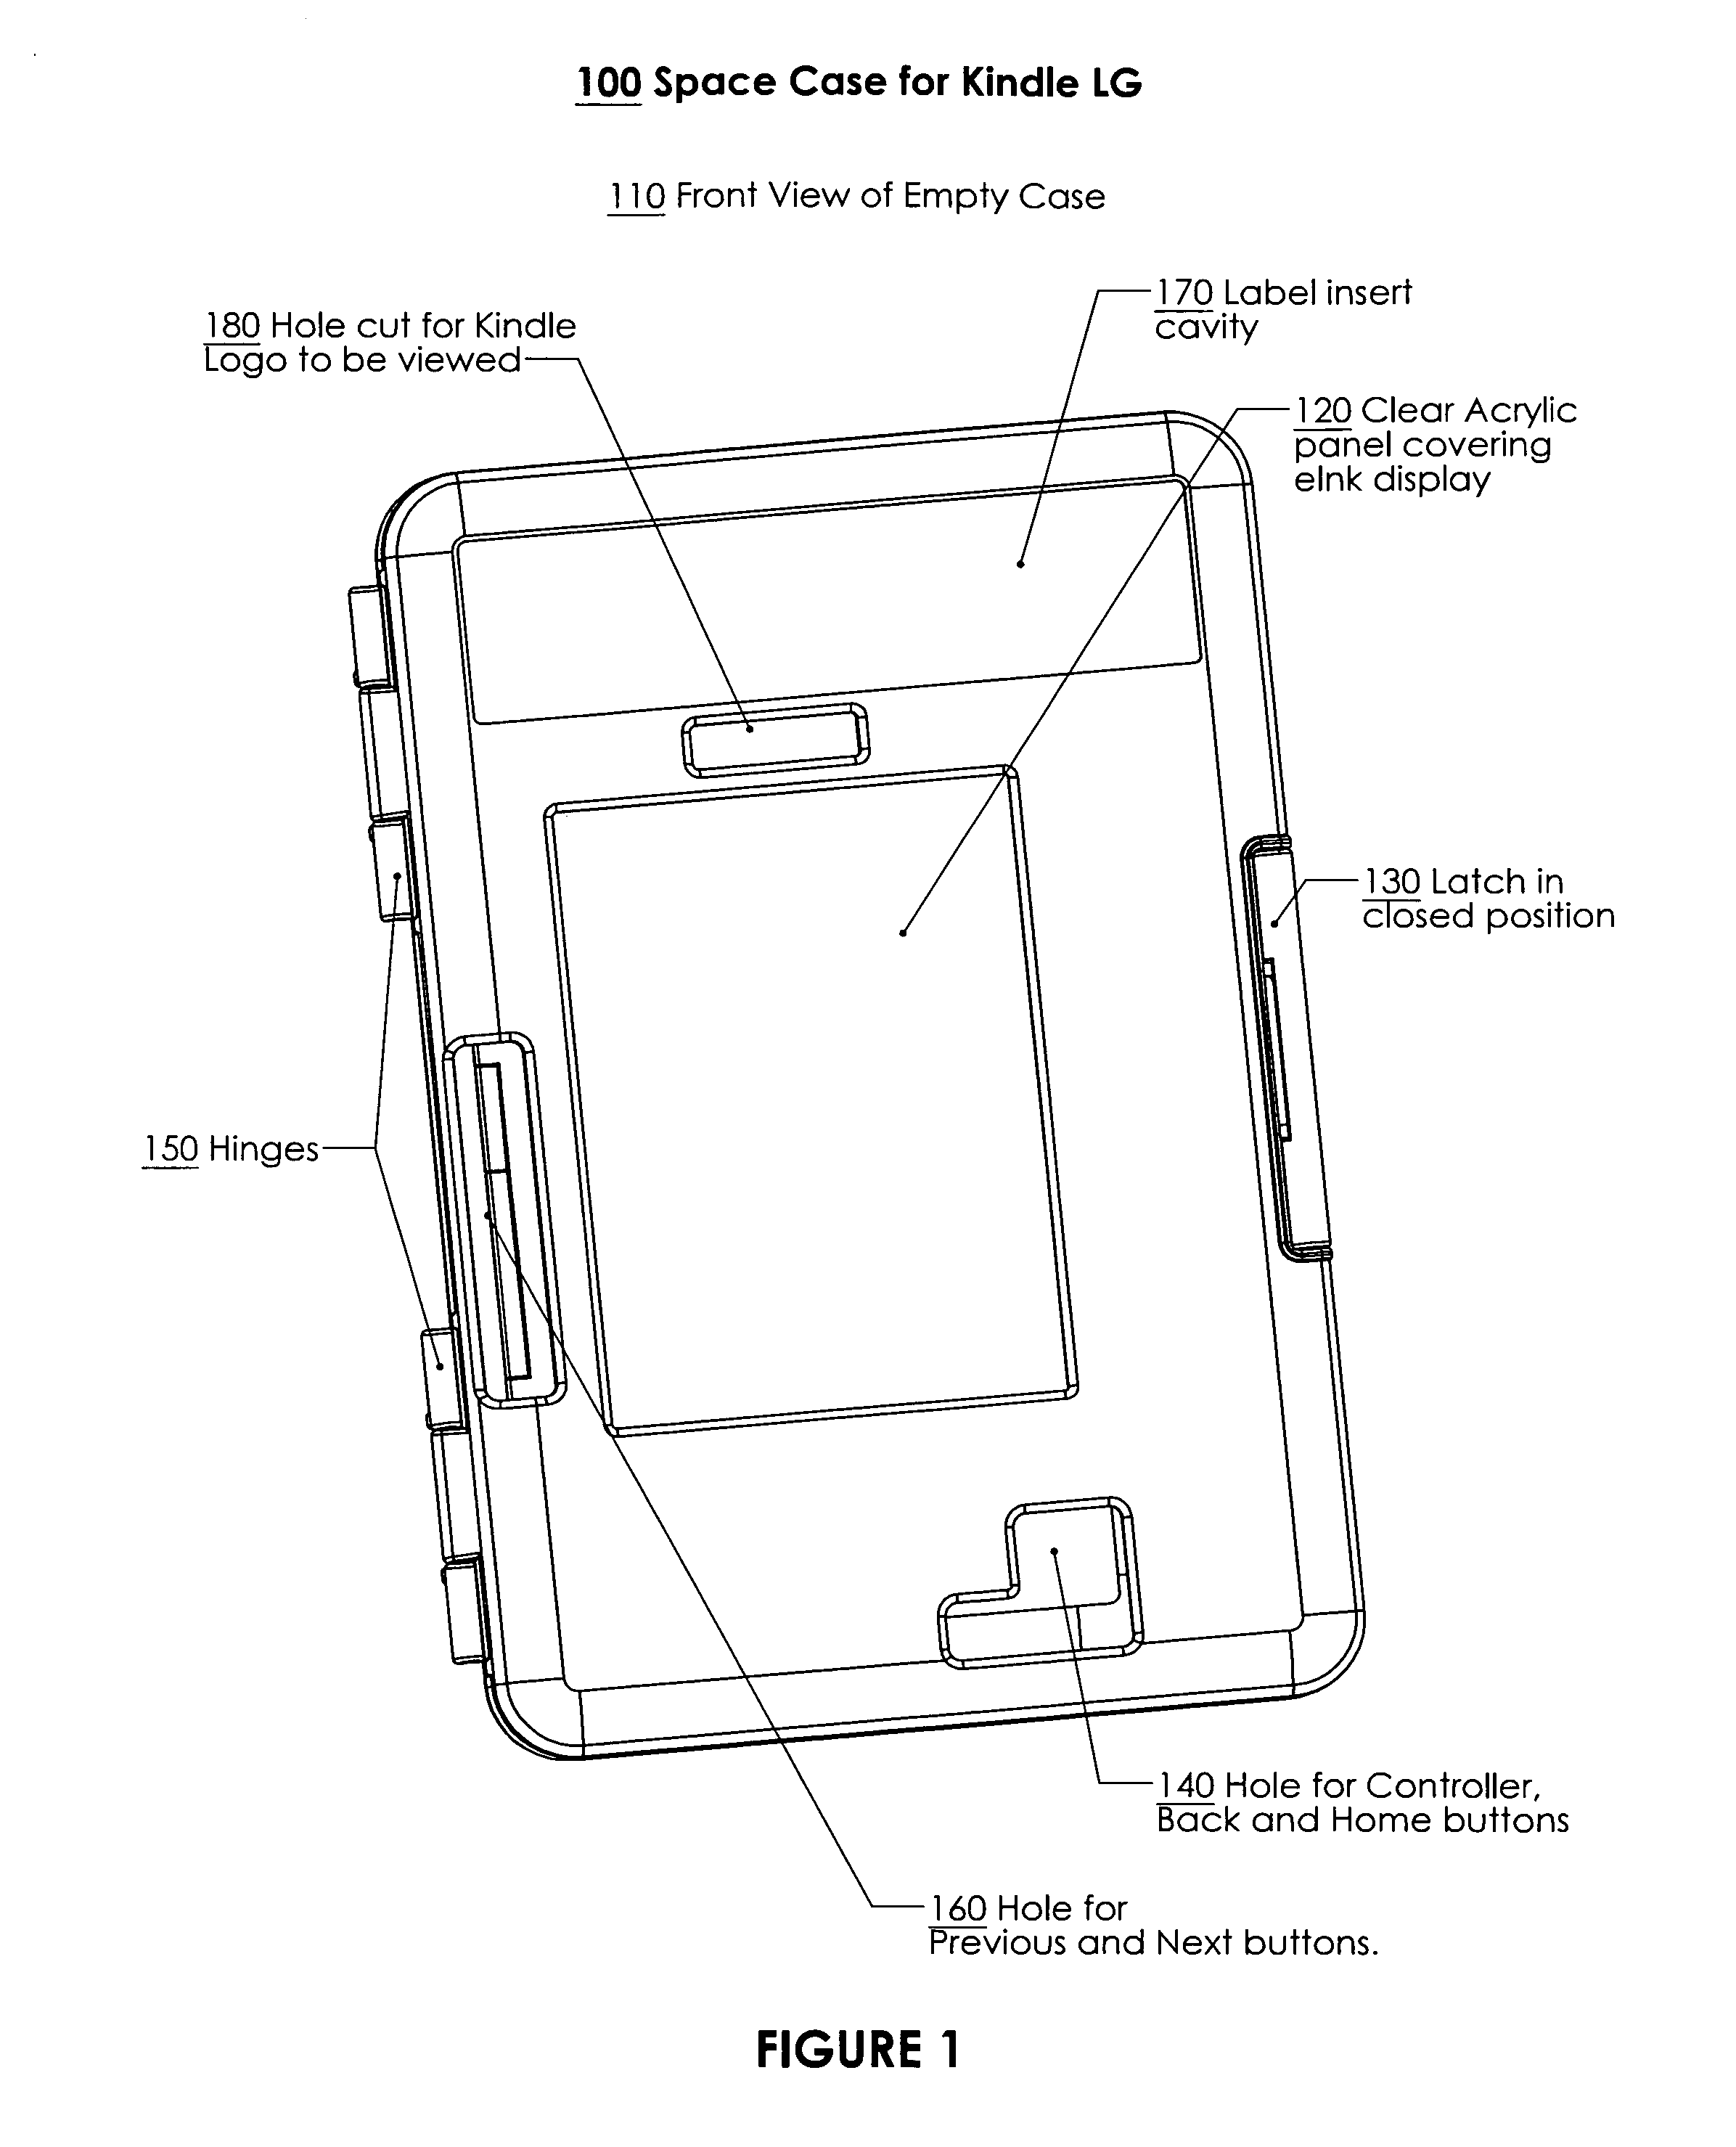 Method and apparatus for novel embodiments to repurpose eink ereaders as writing devices to enable children to write on digital workbook learning content